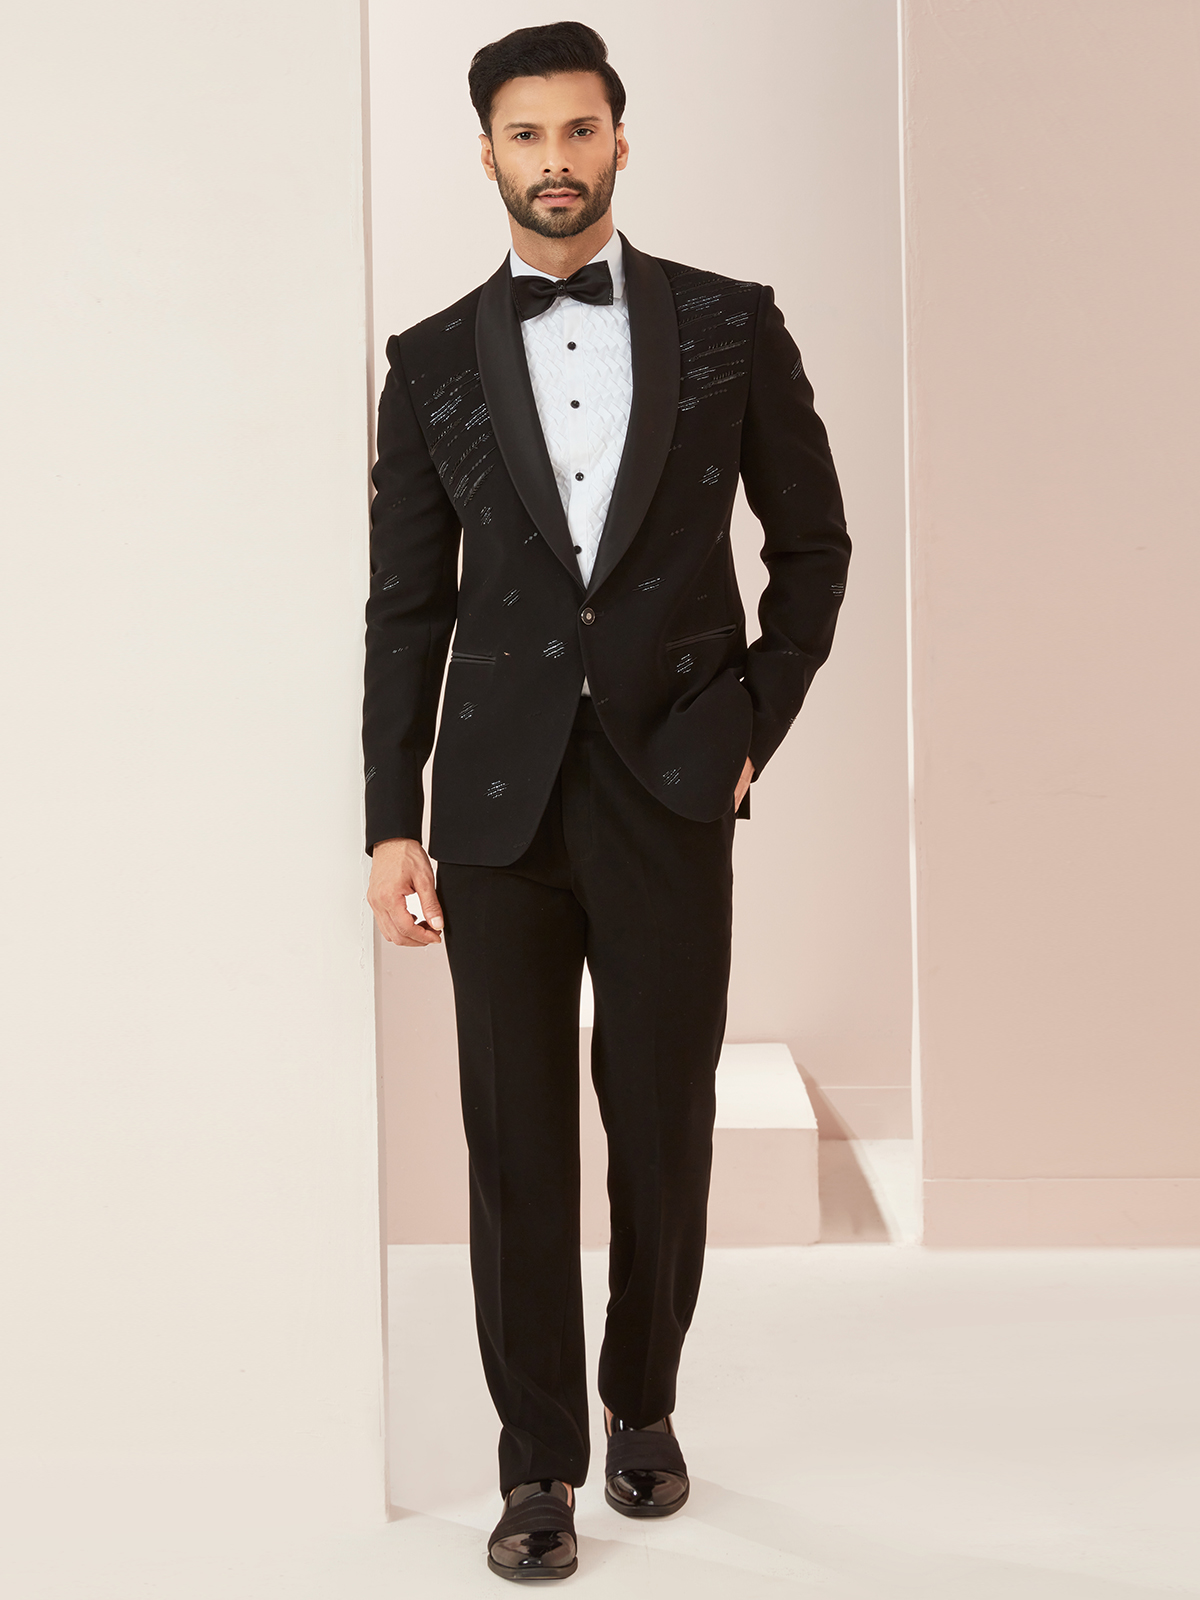 Green Designer Reception Tuxedo Suit with Embroidery Bespoke made to order -